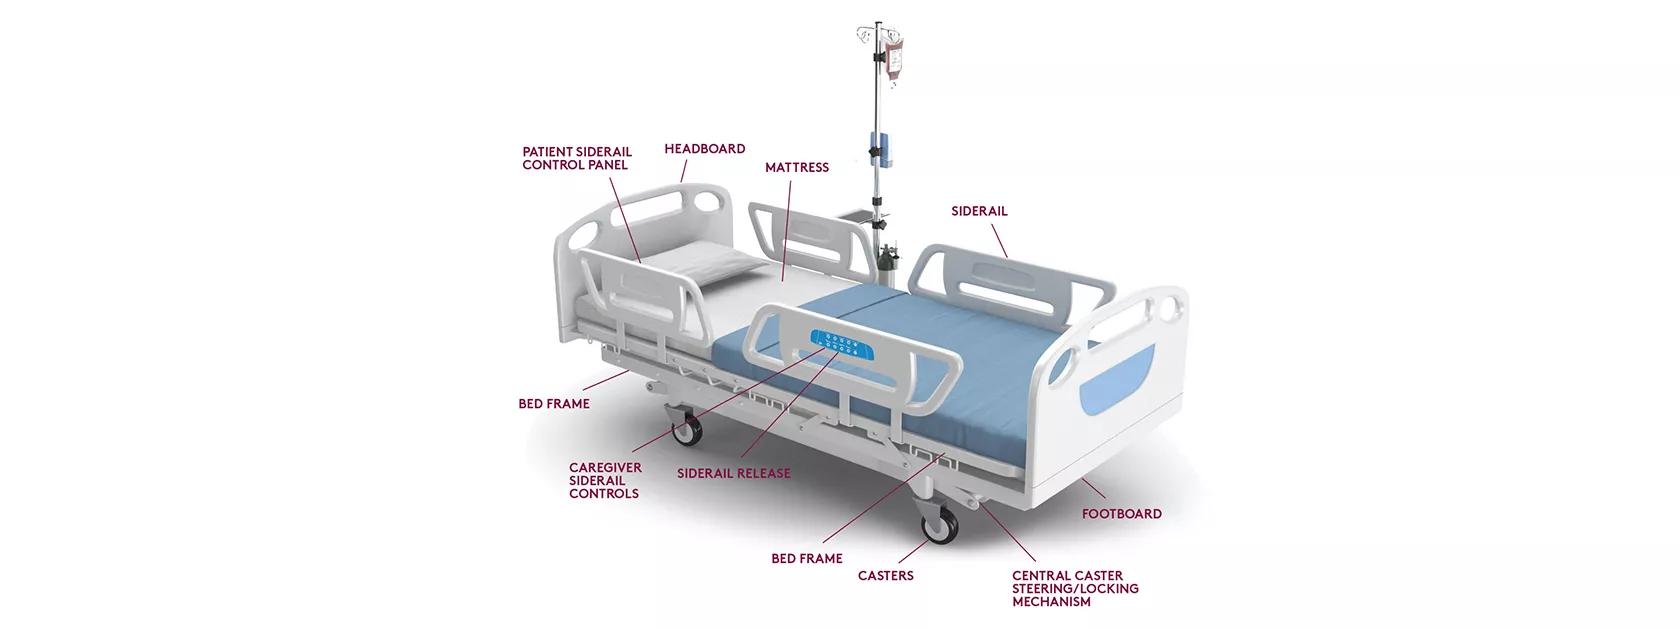 Anatomy of a hospital bed